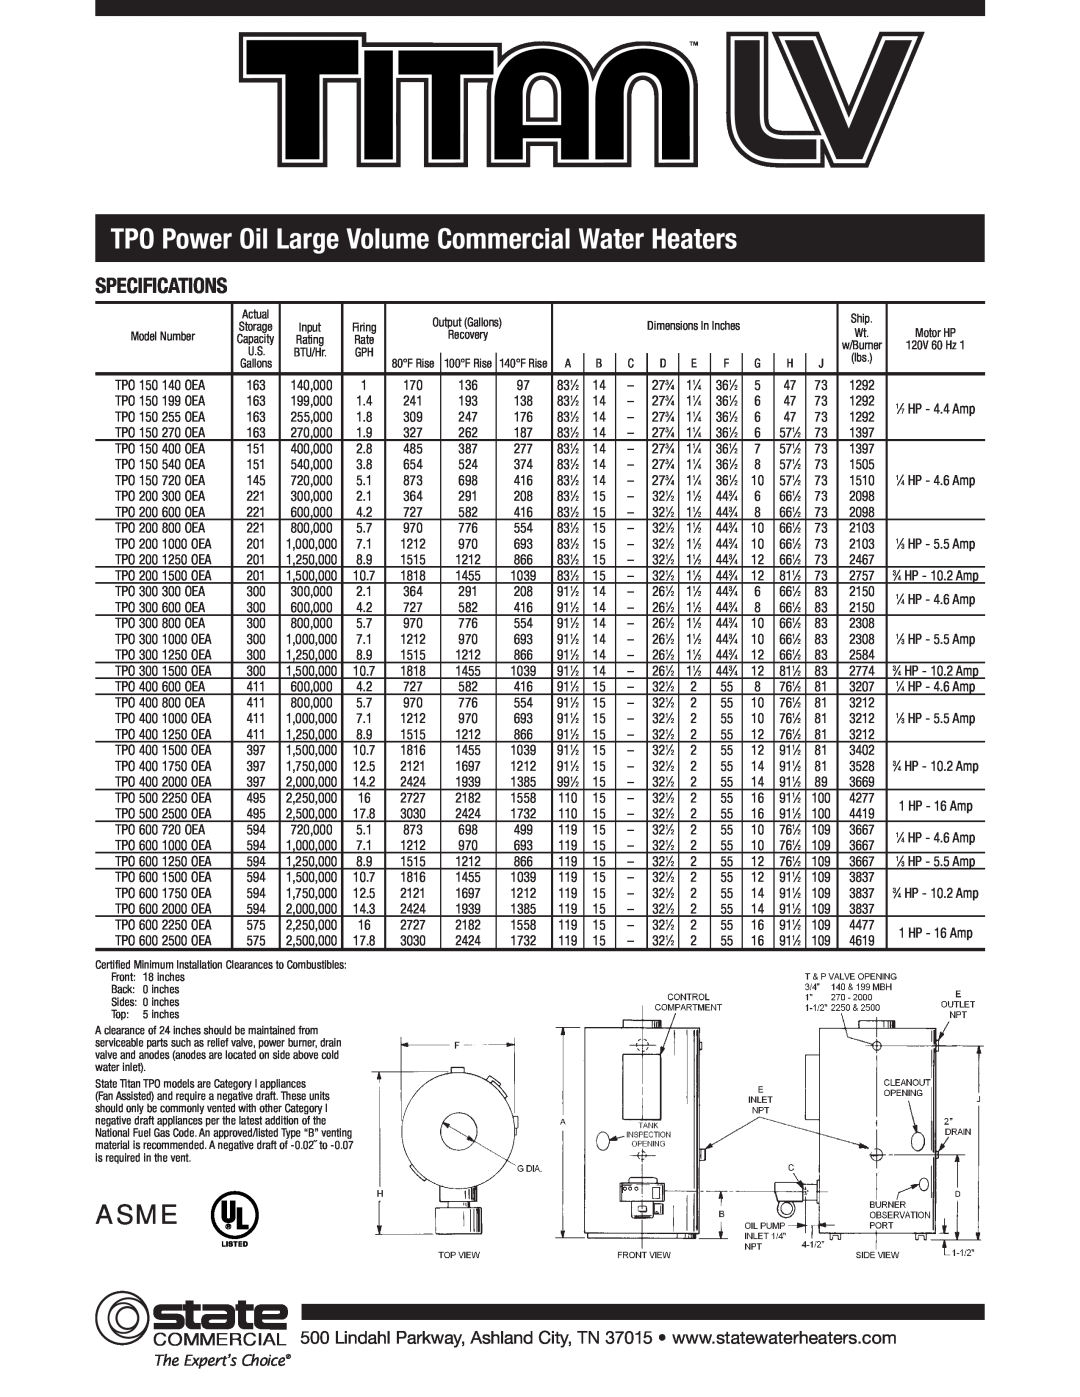 State Industries Gas, Oil & Dual Fuel Commercial Water Heaters Asme, Specifications, TPO 150 140 OEA, The Expert’s Choice 